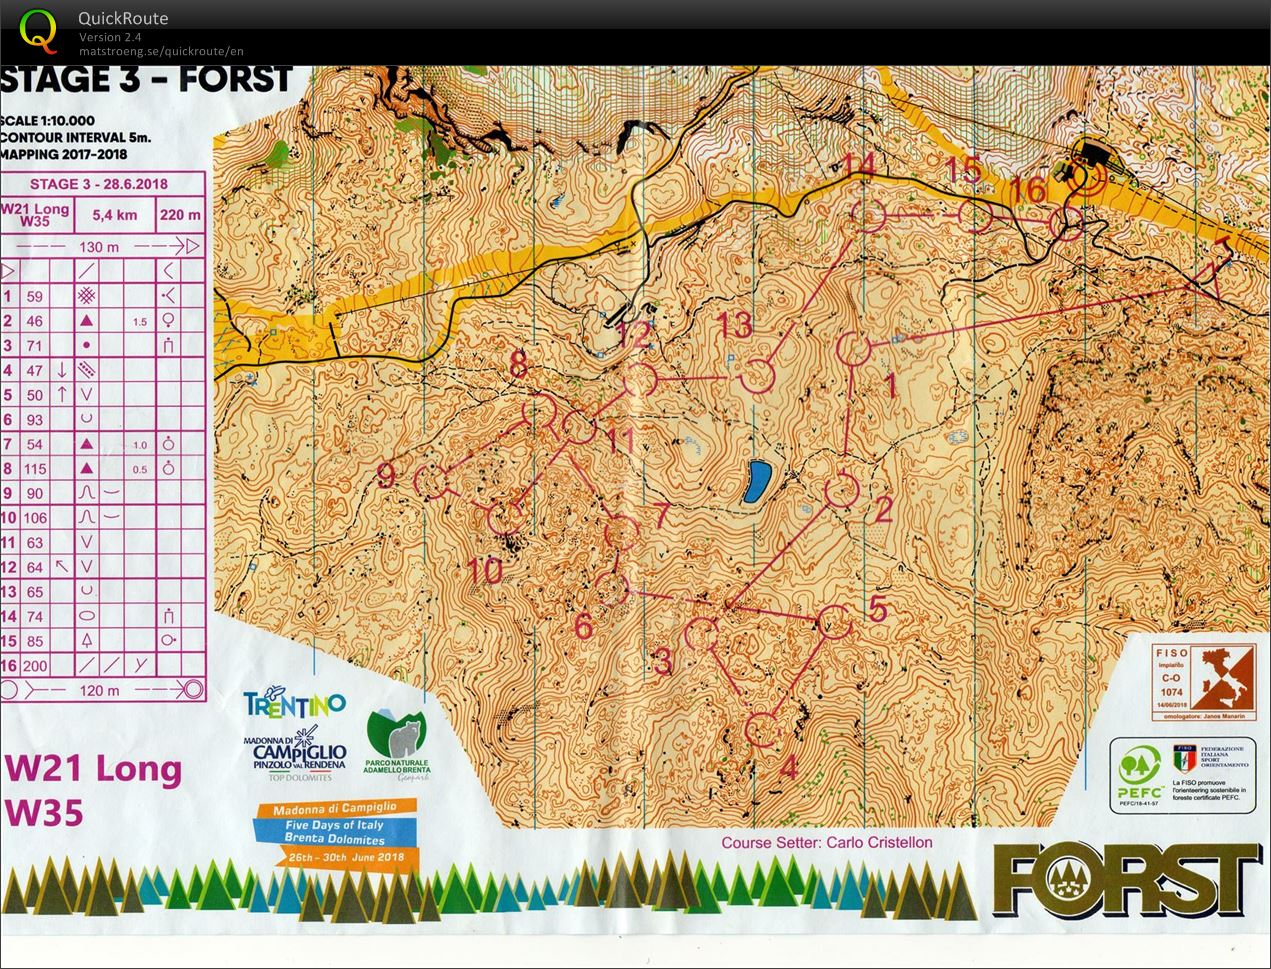 5D of Italy - stage 3 - long - D21long (2018-06-28)